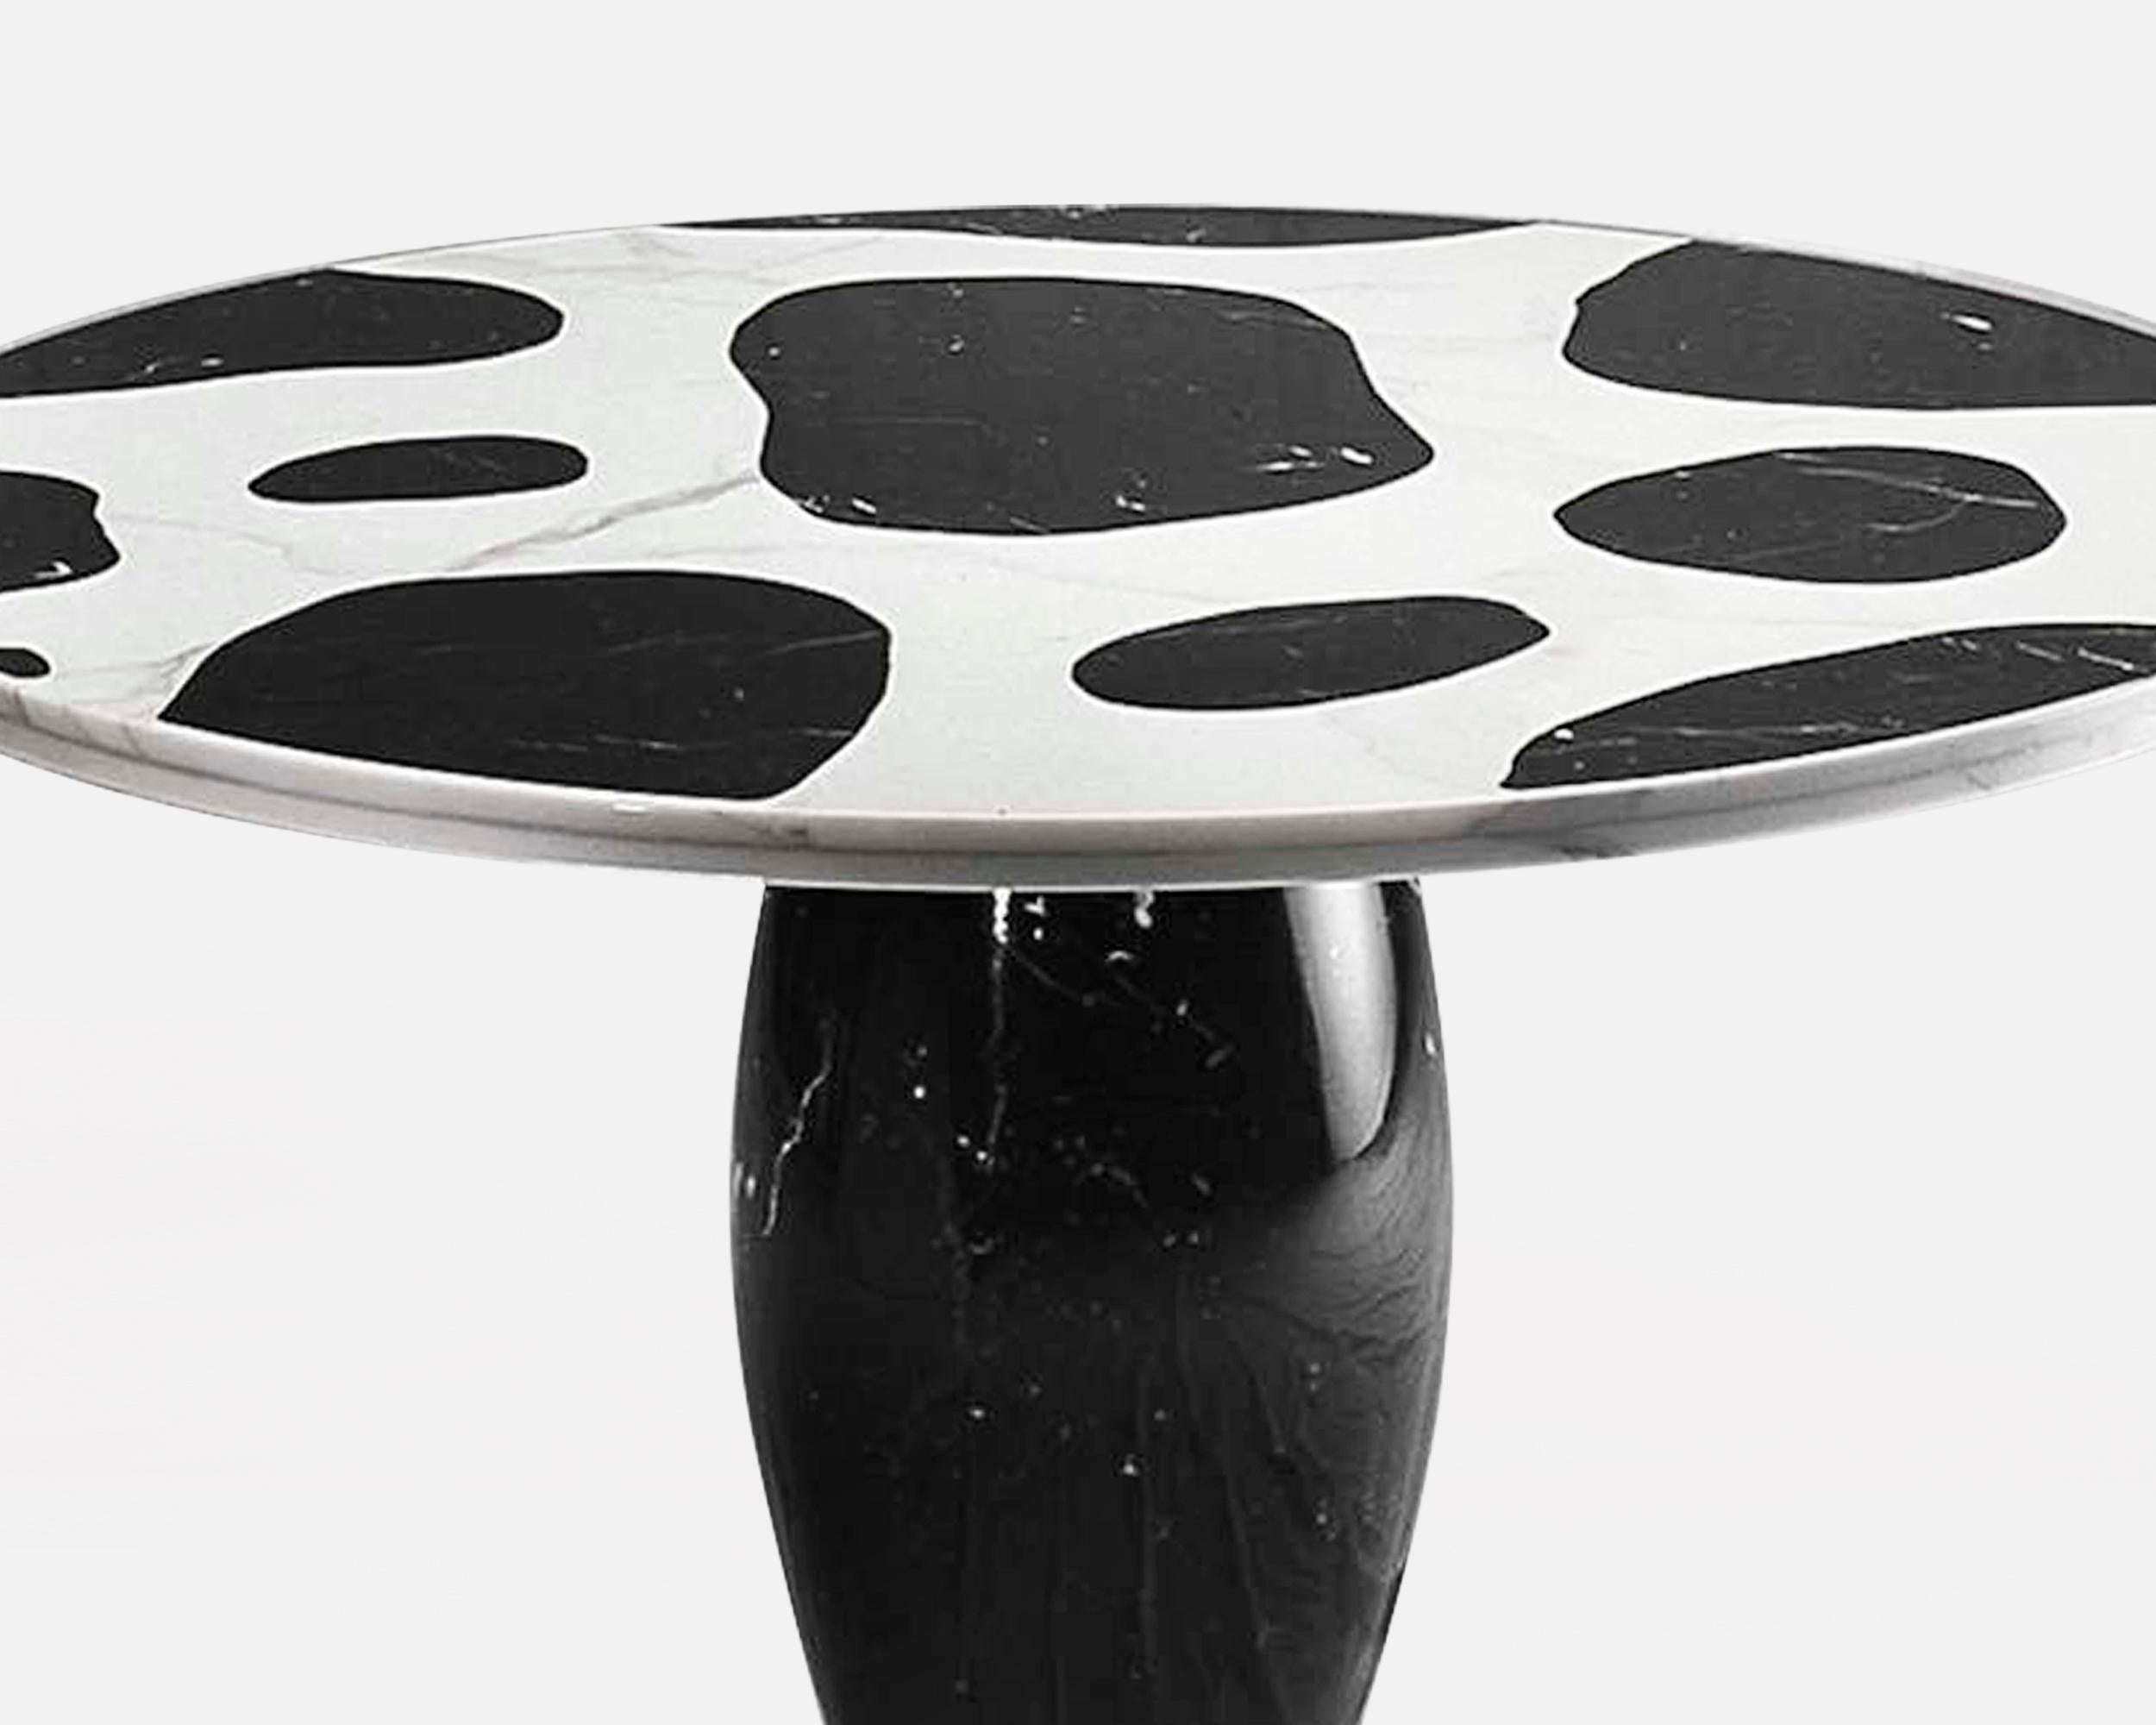 'Kampur' round dining table in marble
Design by Michele de Lucchi,
1970-1980s

Dimensions: H. 73cm, D. 130cm
Material: black marble / white marble / travertine / or more...

Customization: 
This table is still produced by manufacturers in